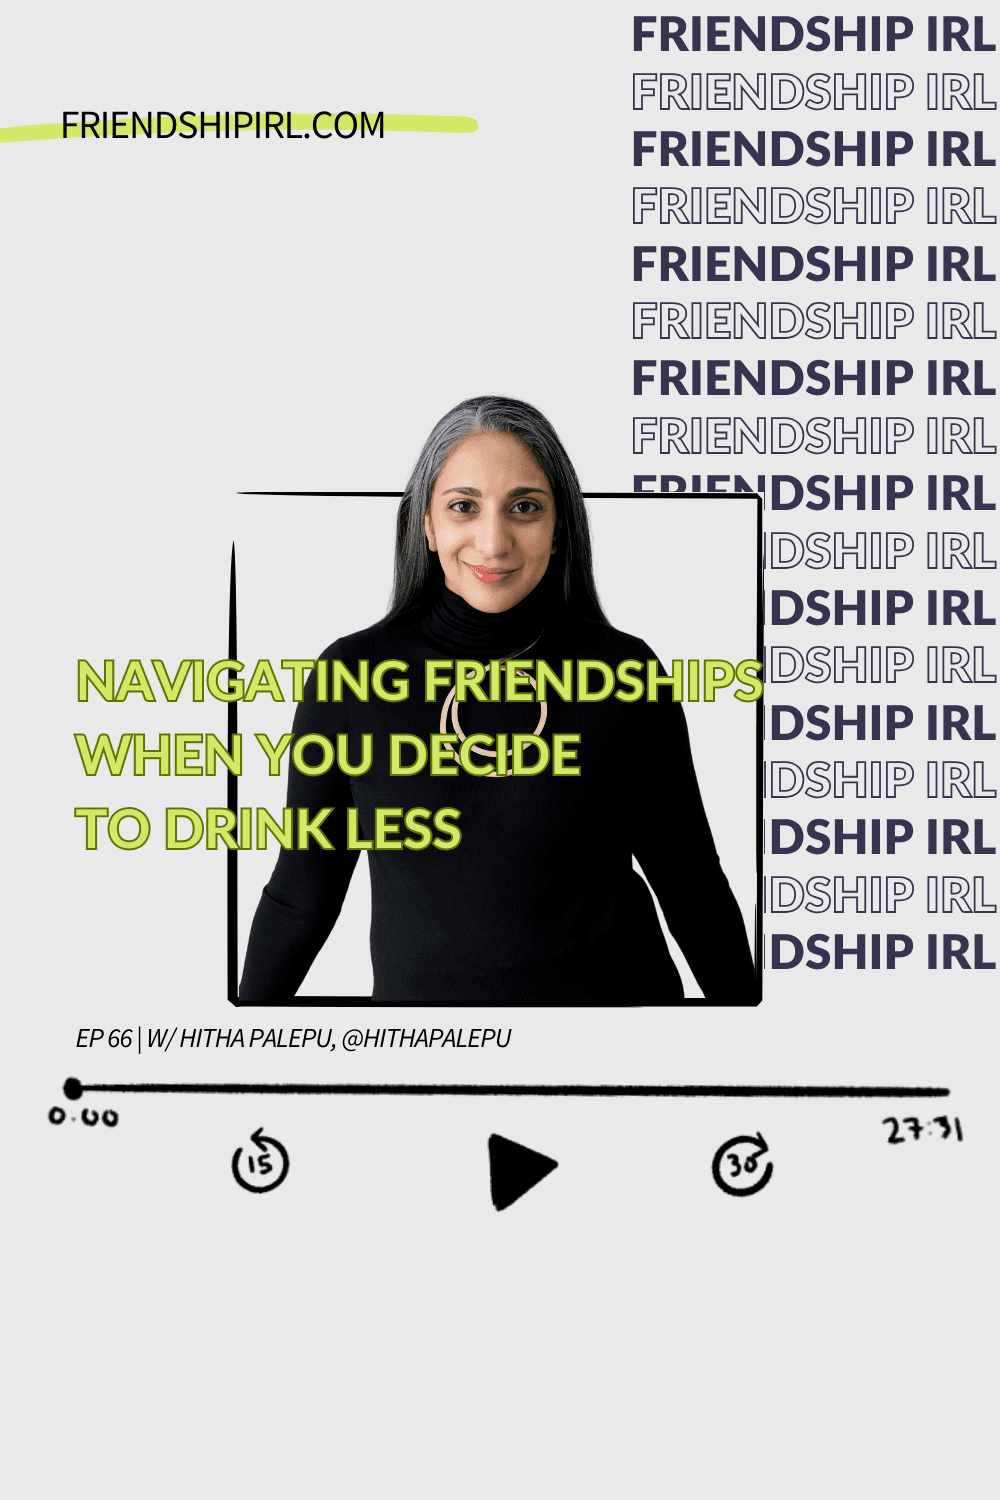 Friendship IRL Podcast - Episode 66 - Navigating Friendships When You Decide to Drink Less with Hitha Palepu